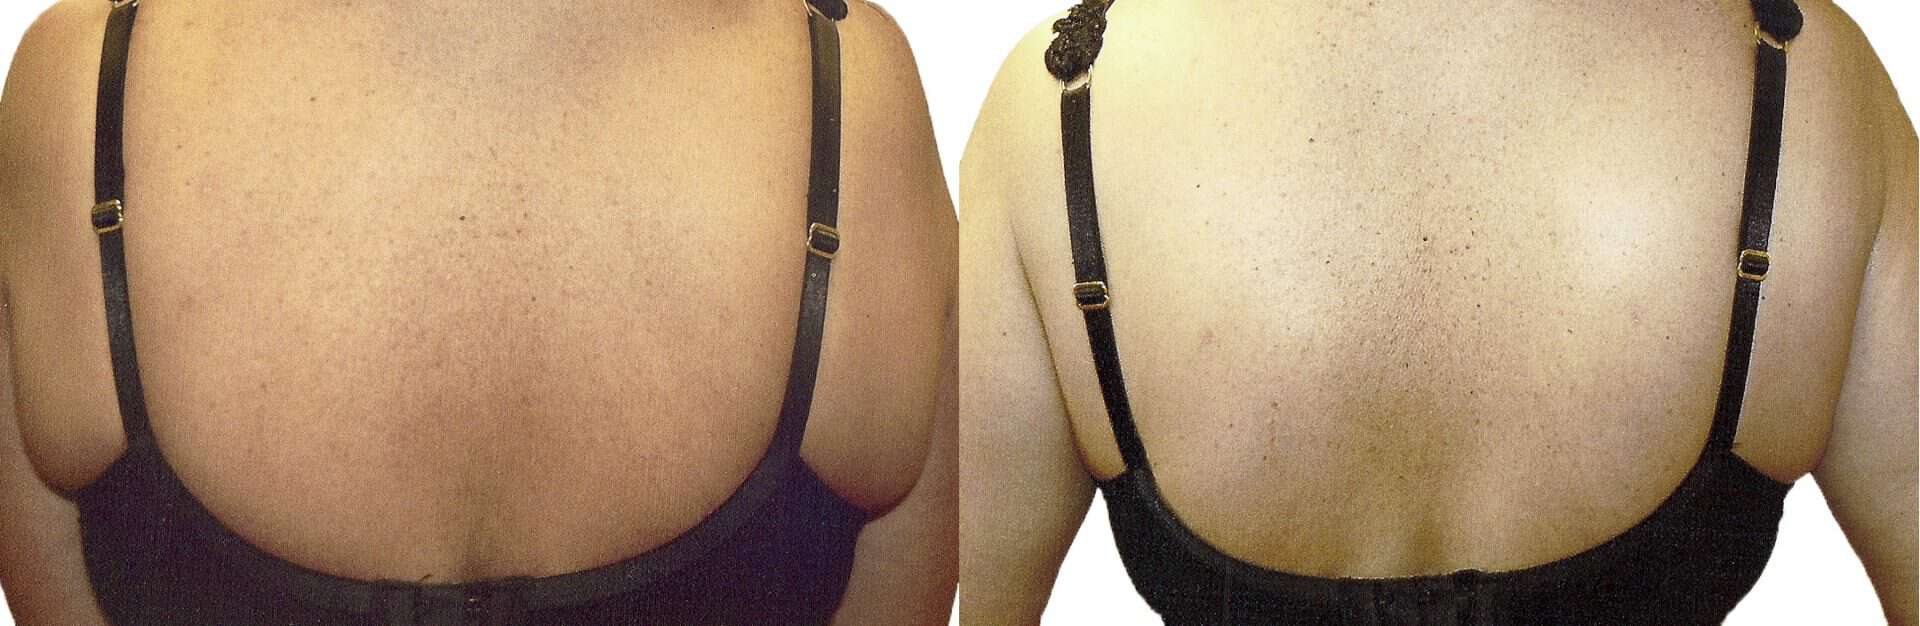 Exilis Ultra before and after back